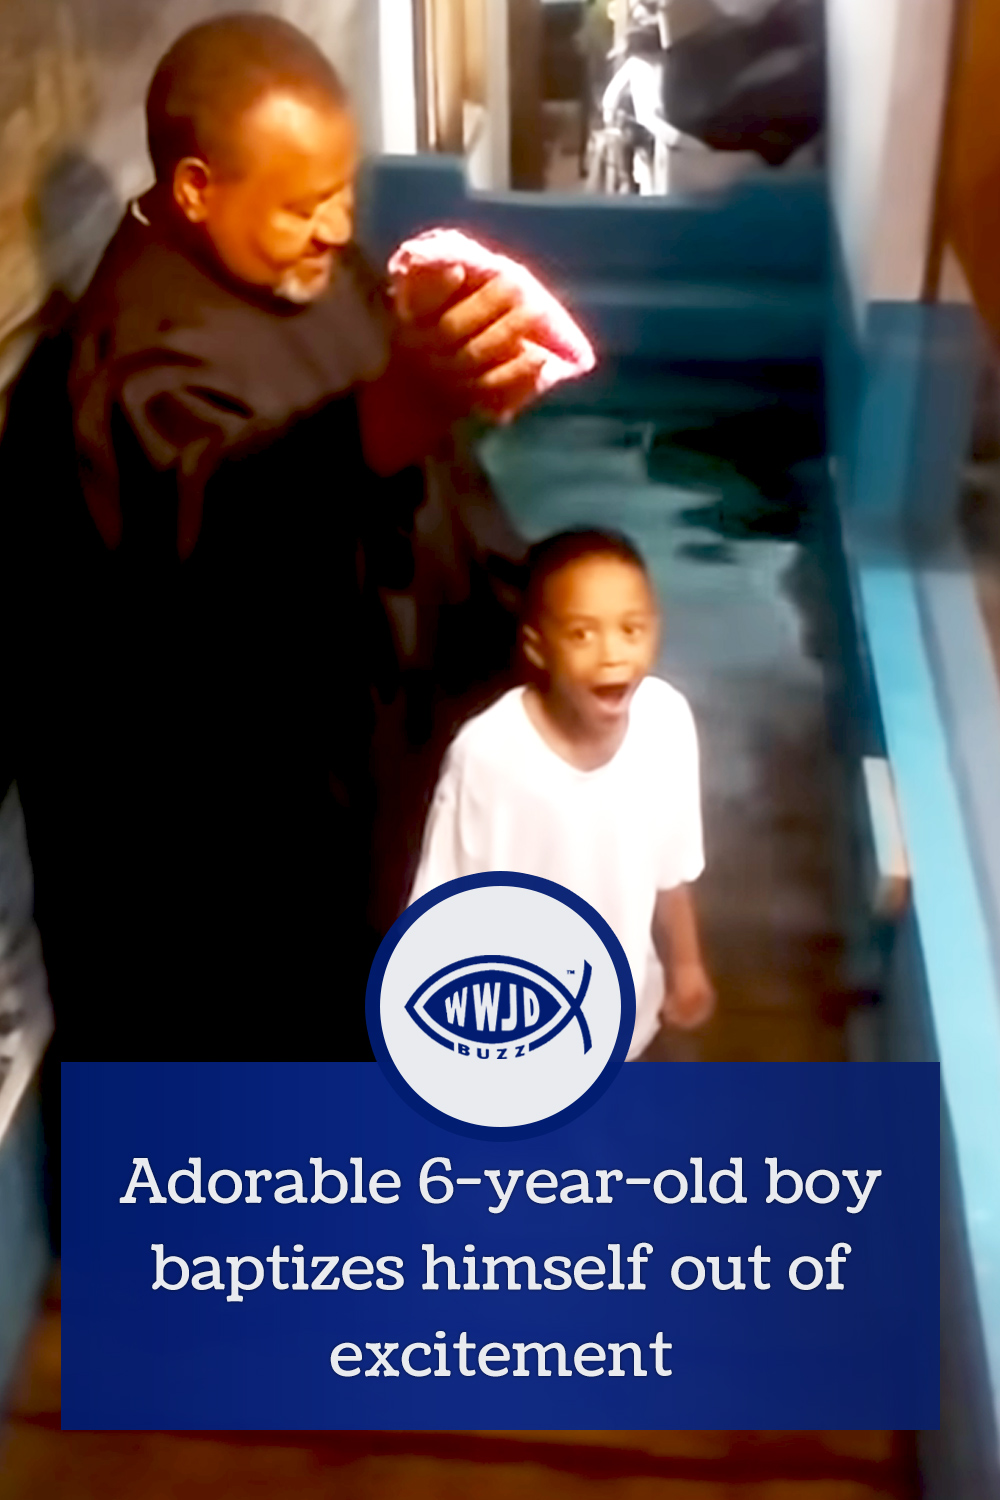 Adorable 6-year-old boy baptizes himself out of excitement